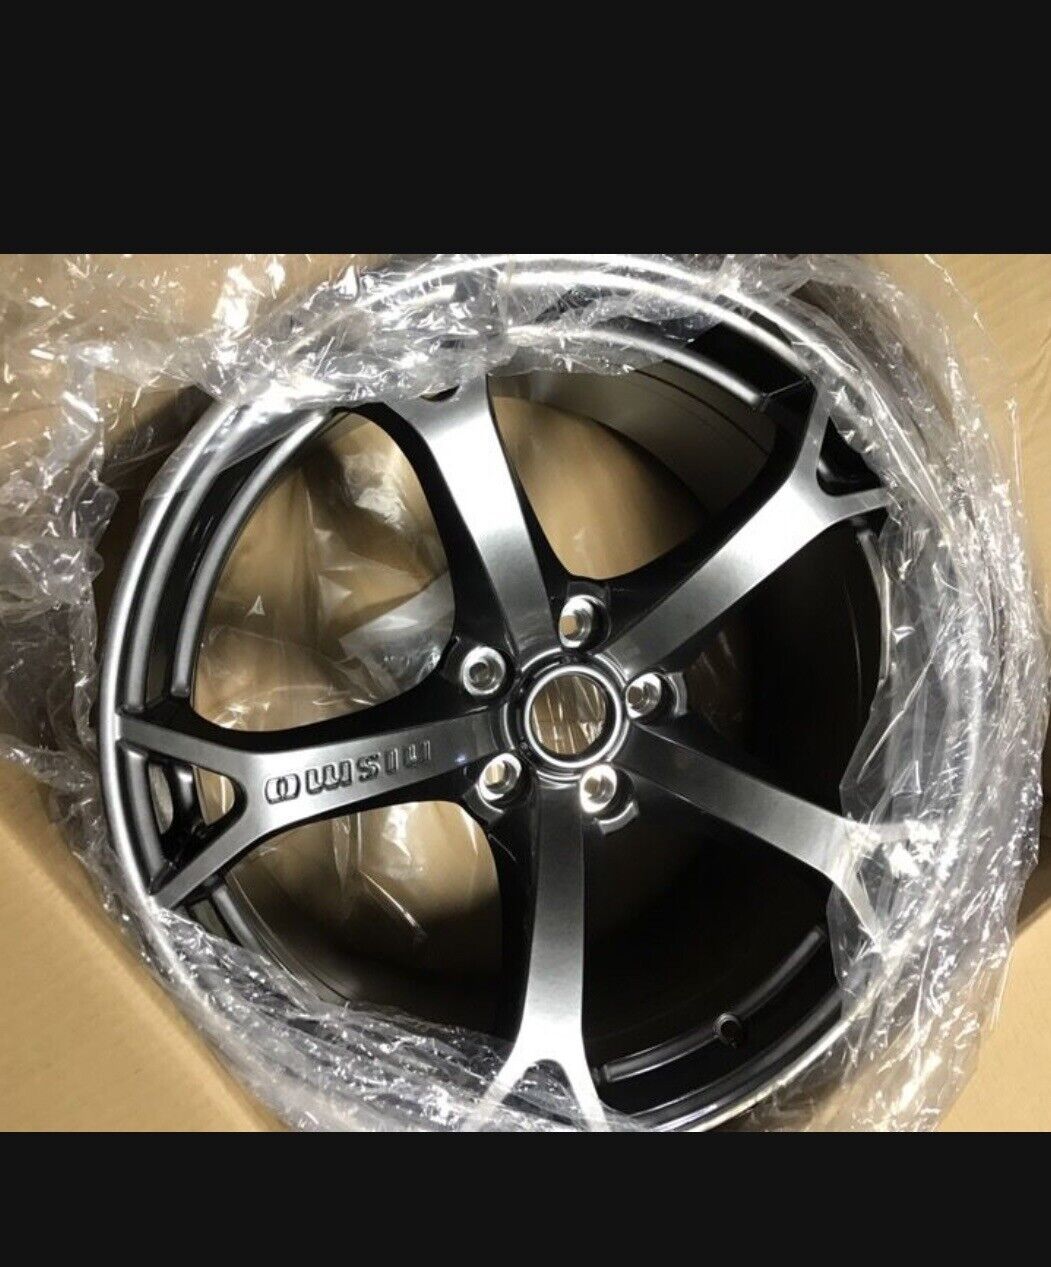 Nissan 370z Set Of 4 OEM Nismo Ray Forged Wheels Rims (Rears) BRAND NEW IN BOX